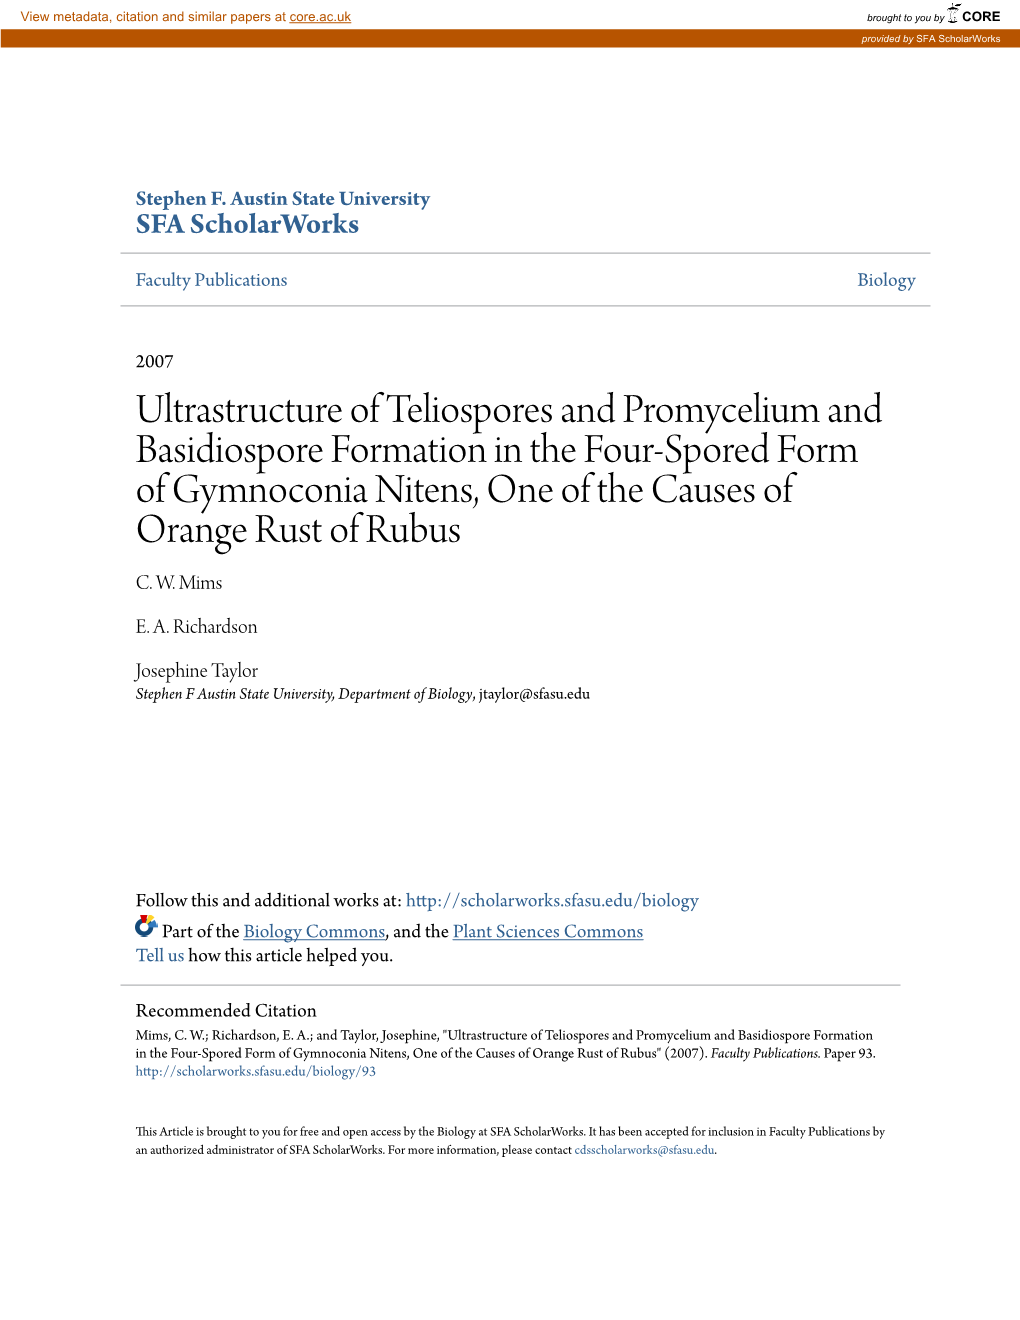 Ultrastructure of Teliospores and Promycelium and Basidiospore Formation in the Four-Spored Form of Gymnoconia Nitens, One of the Causes of Orange Rust of Rubus C